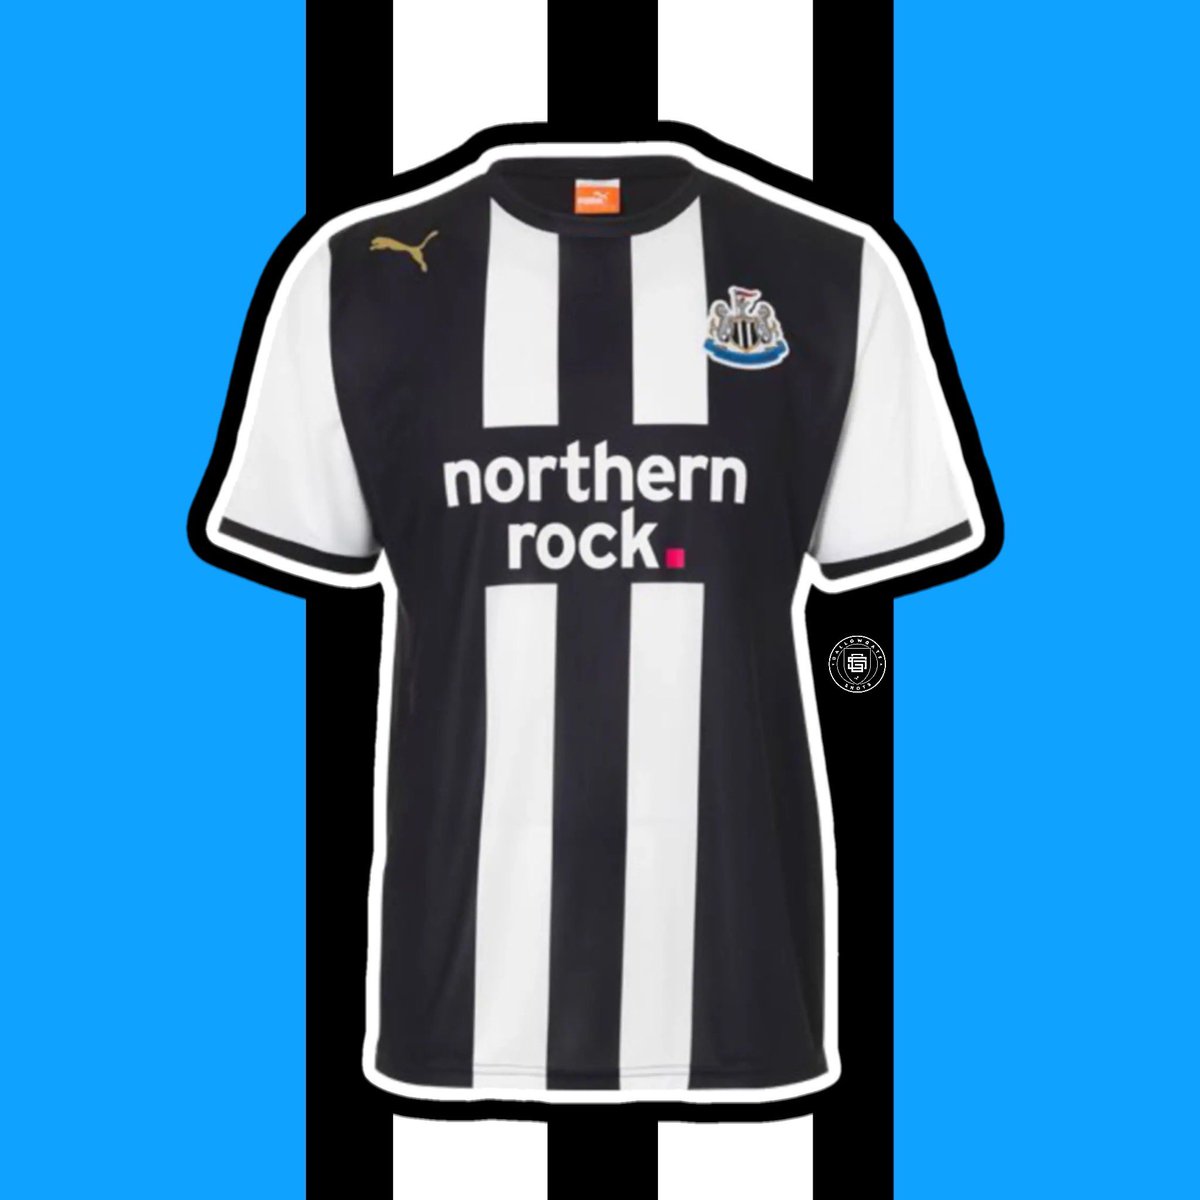 Which player does this kit remind you of ?